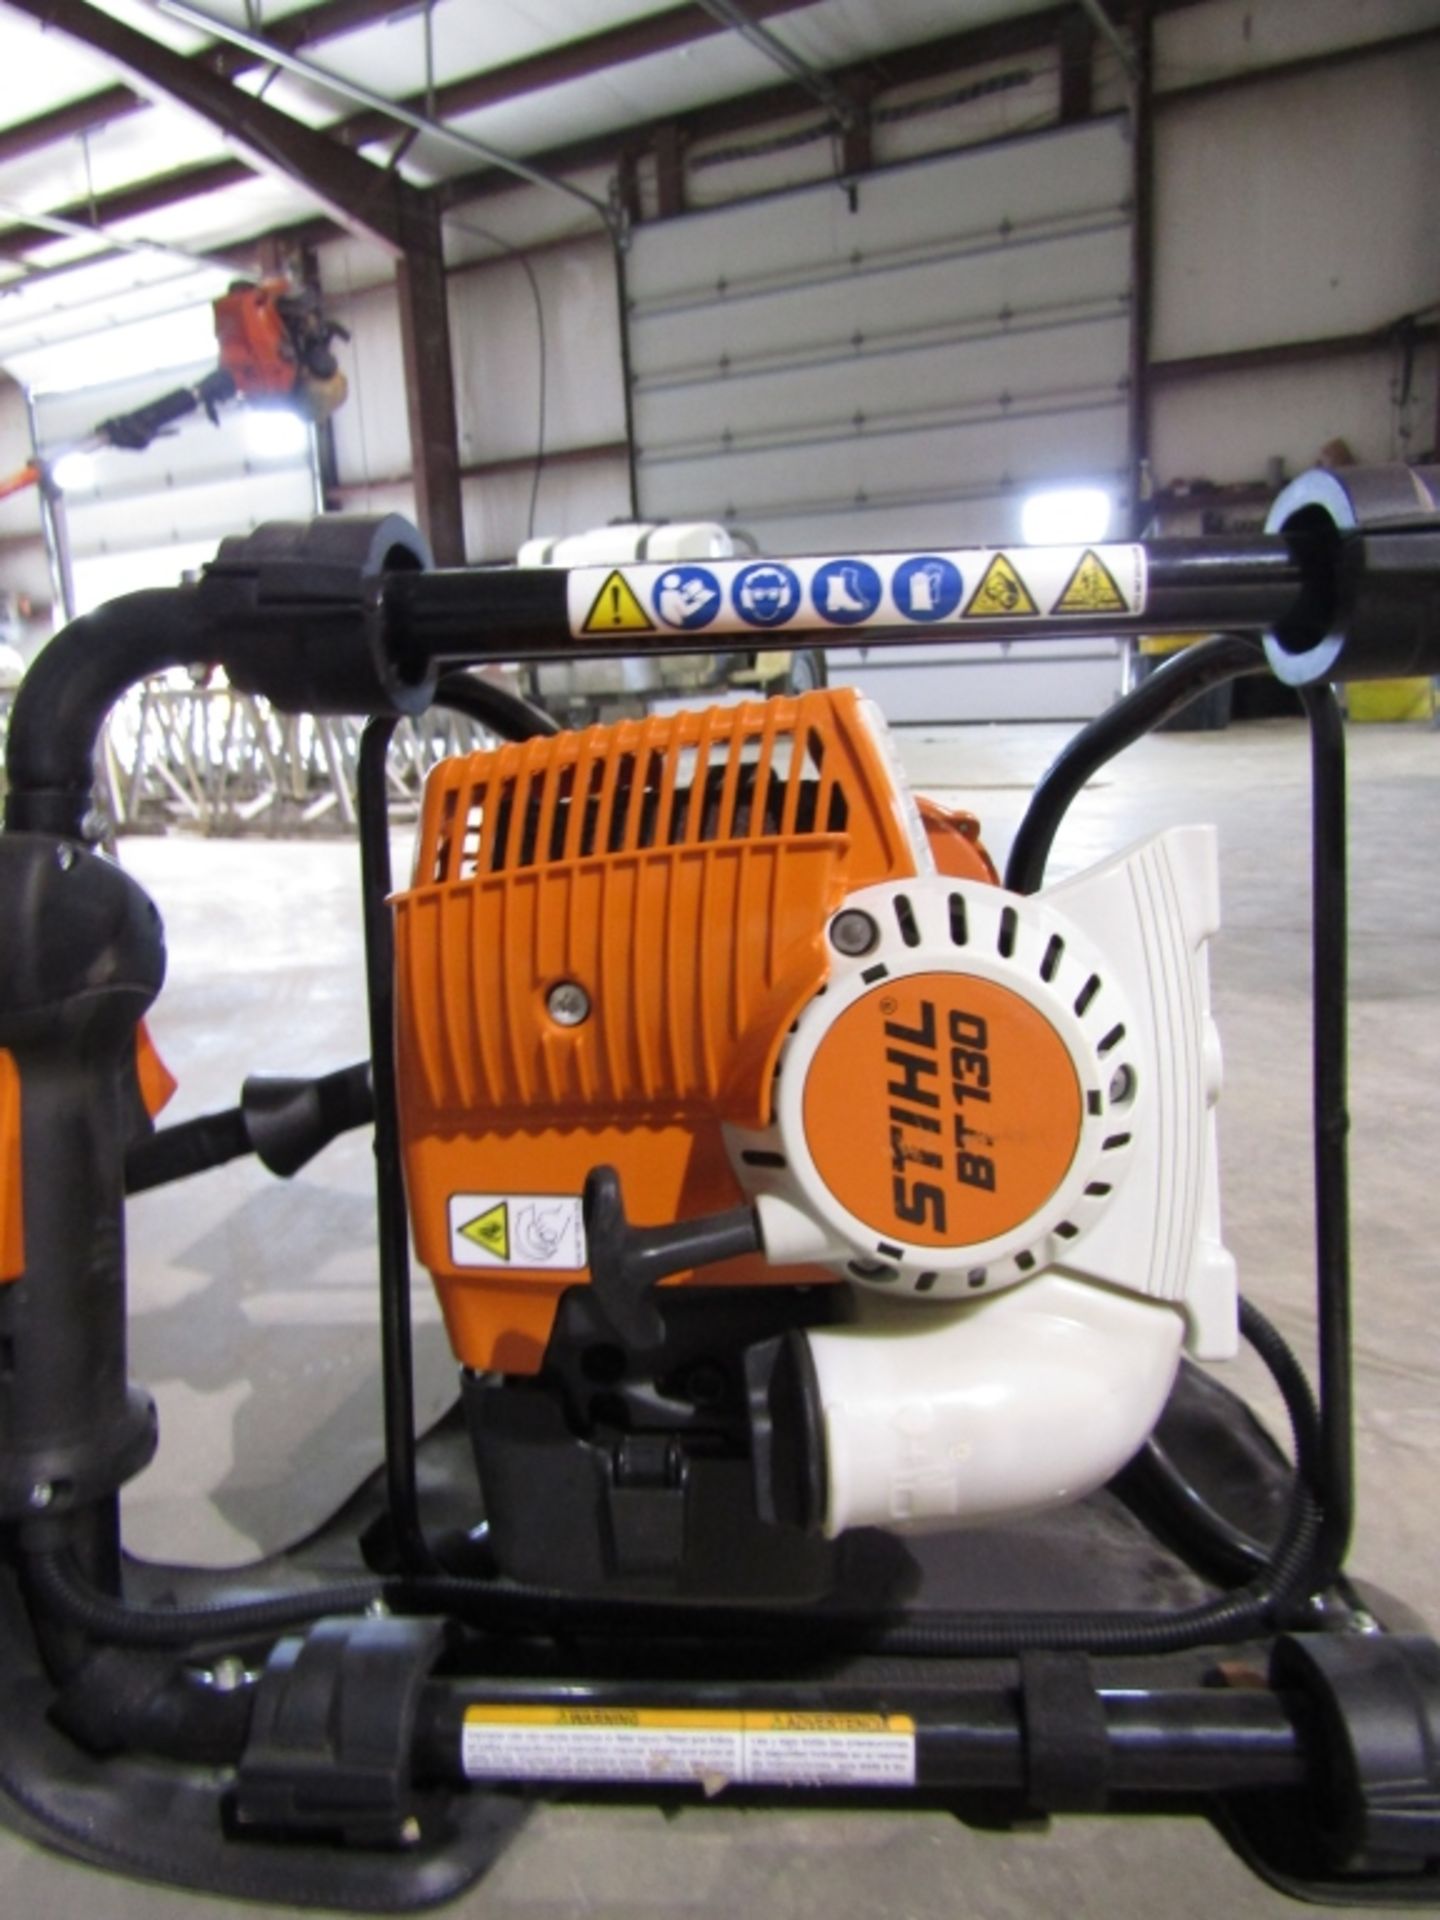 Stihl BT130 Gas Powered Post Hole Digger, Serial # 139L39 Located in Hopkinton, IA - Image 2 of 3